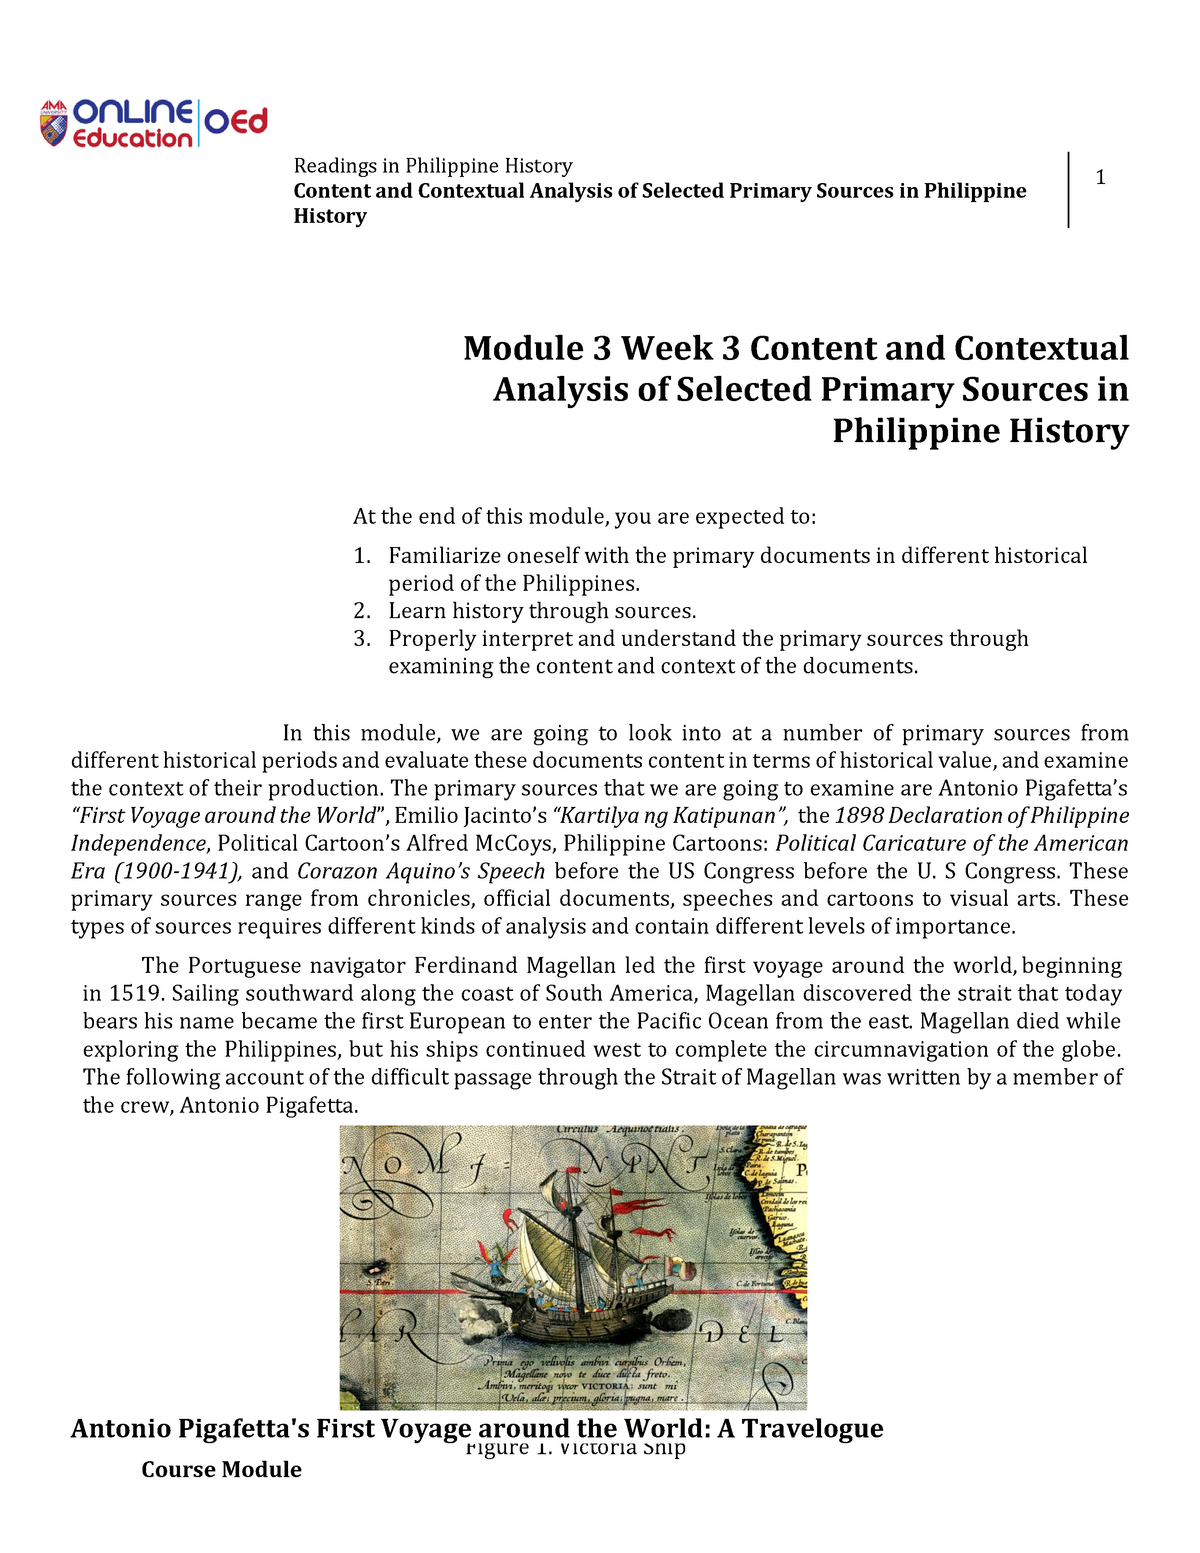 25 - Content and Contextual Analysis for Selected Primary Resources